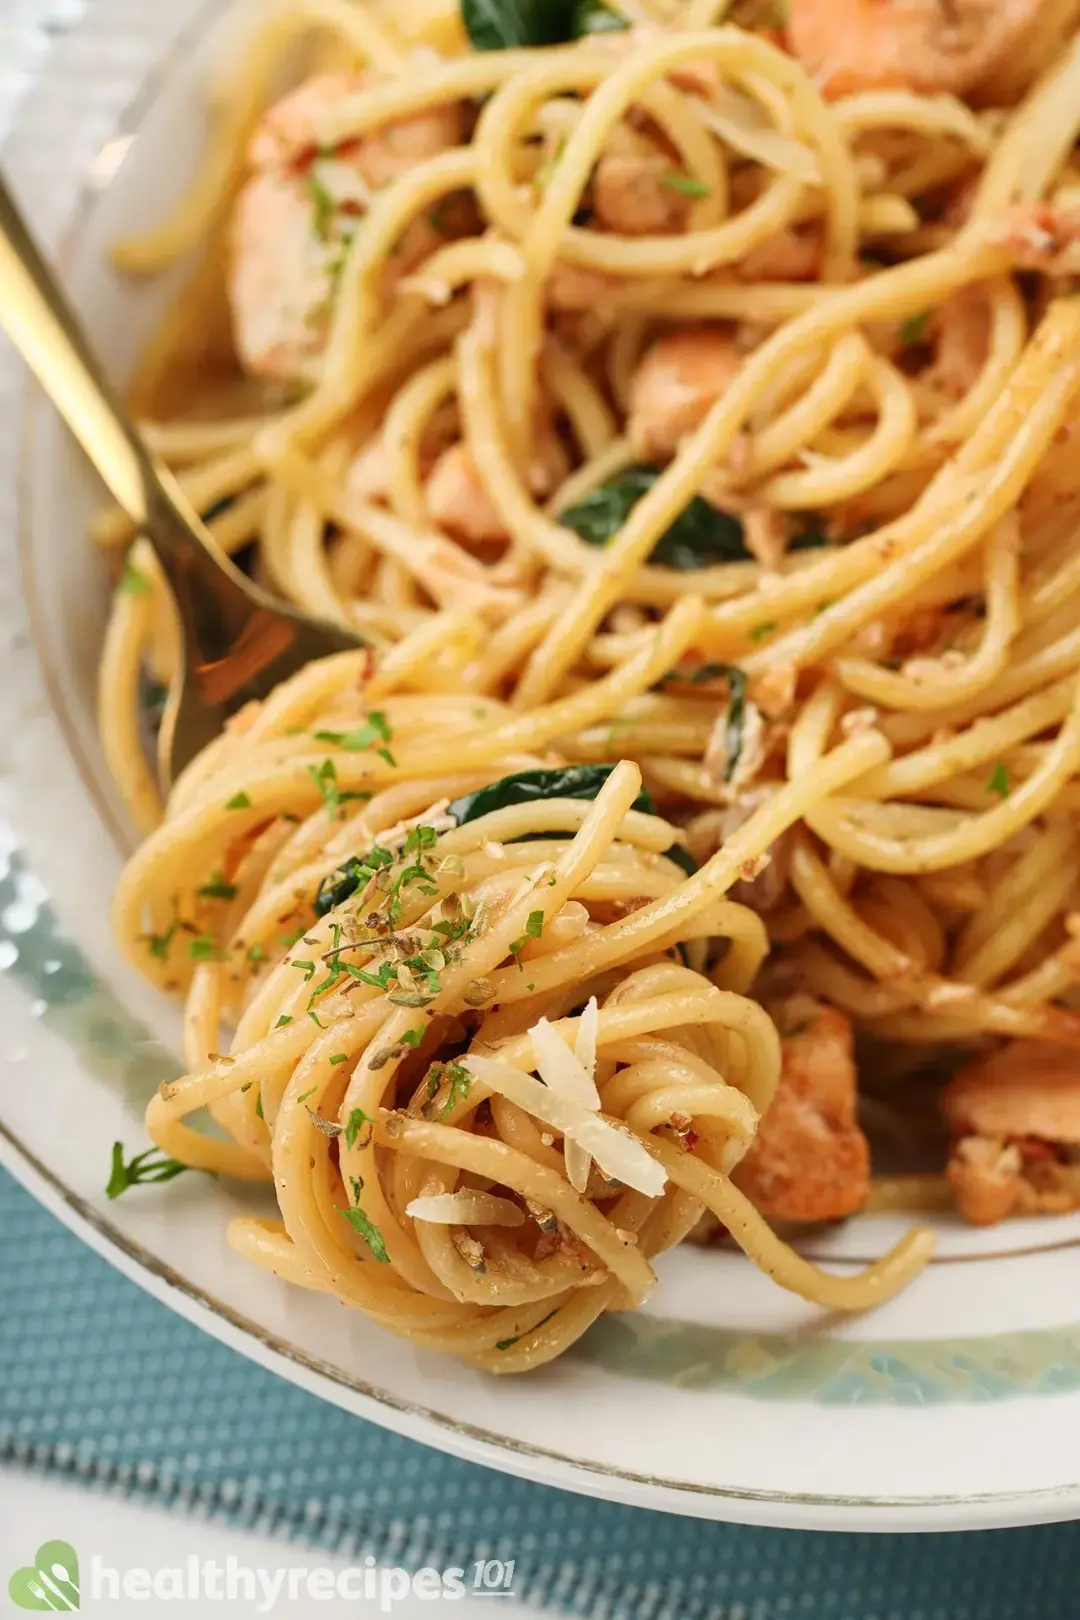 A close-up shot of a fork with spaghetti wrapped around it laid on the edge of a plate of salmon spaghetti